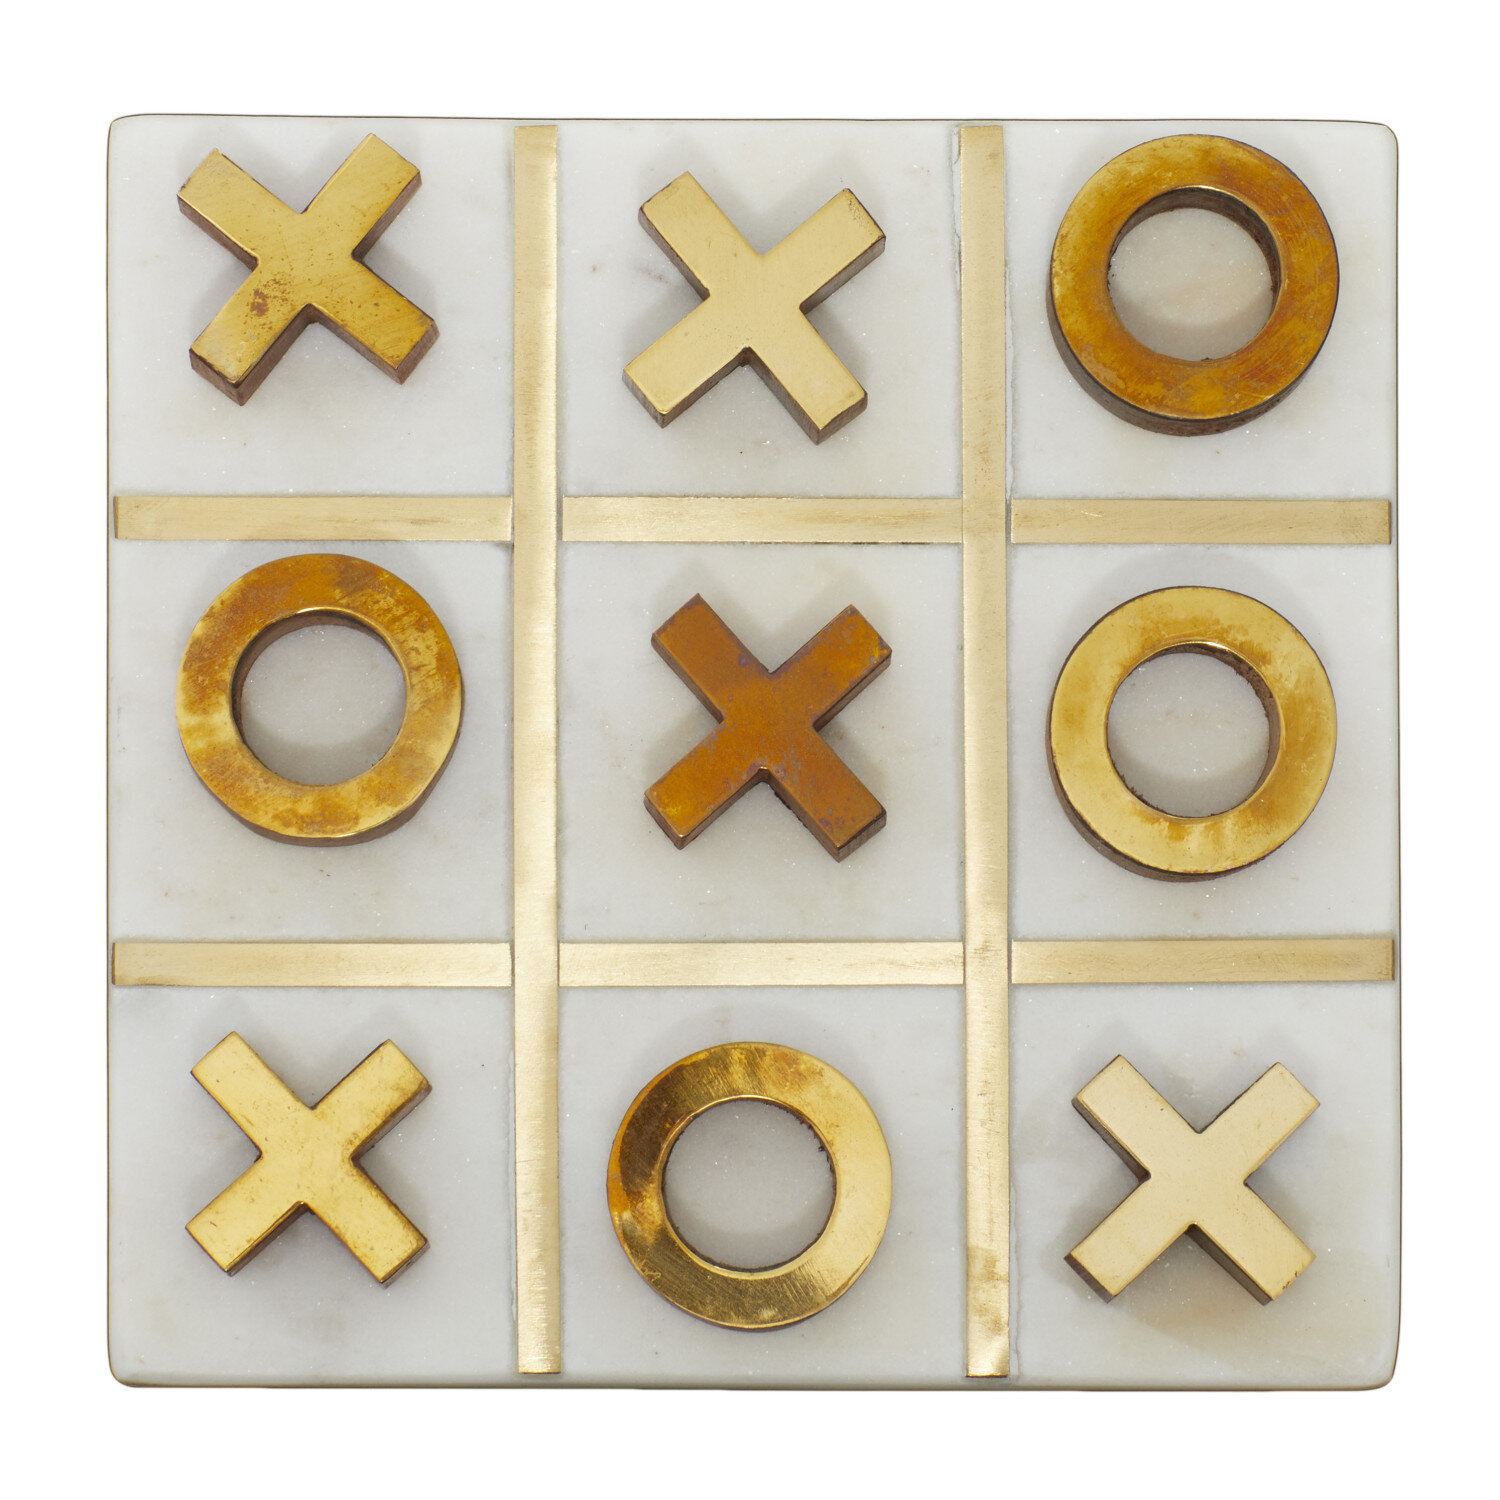 Mosaic Tic Tac Toe Get 3 or 4 in a Row Comes With Base 